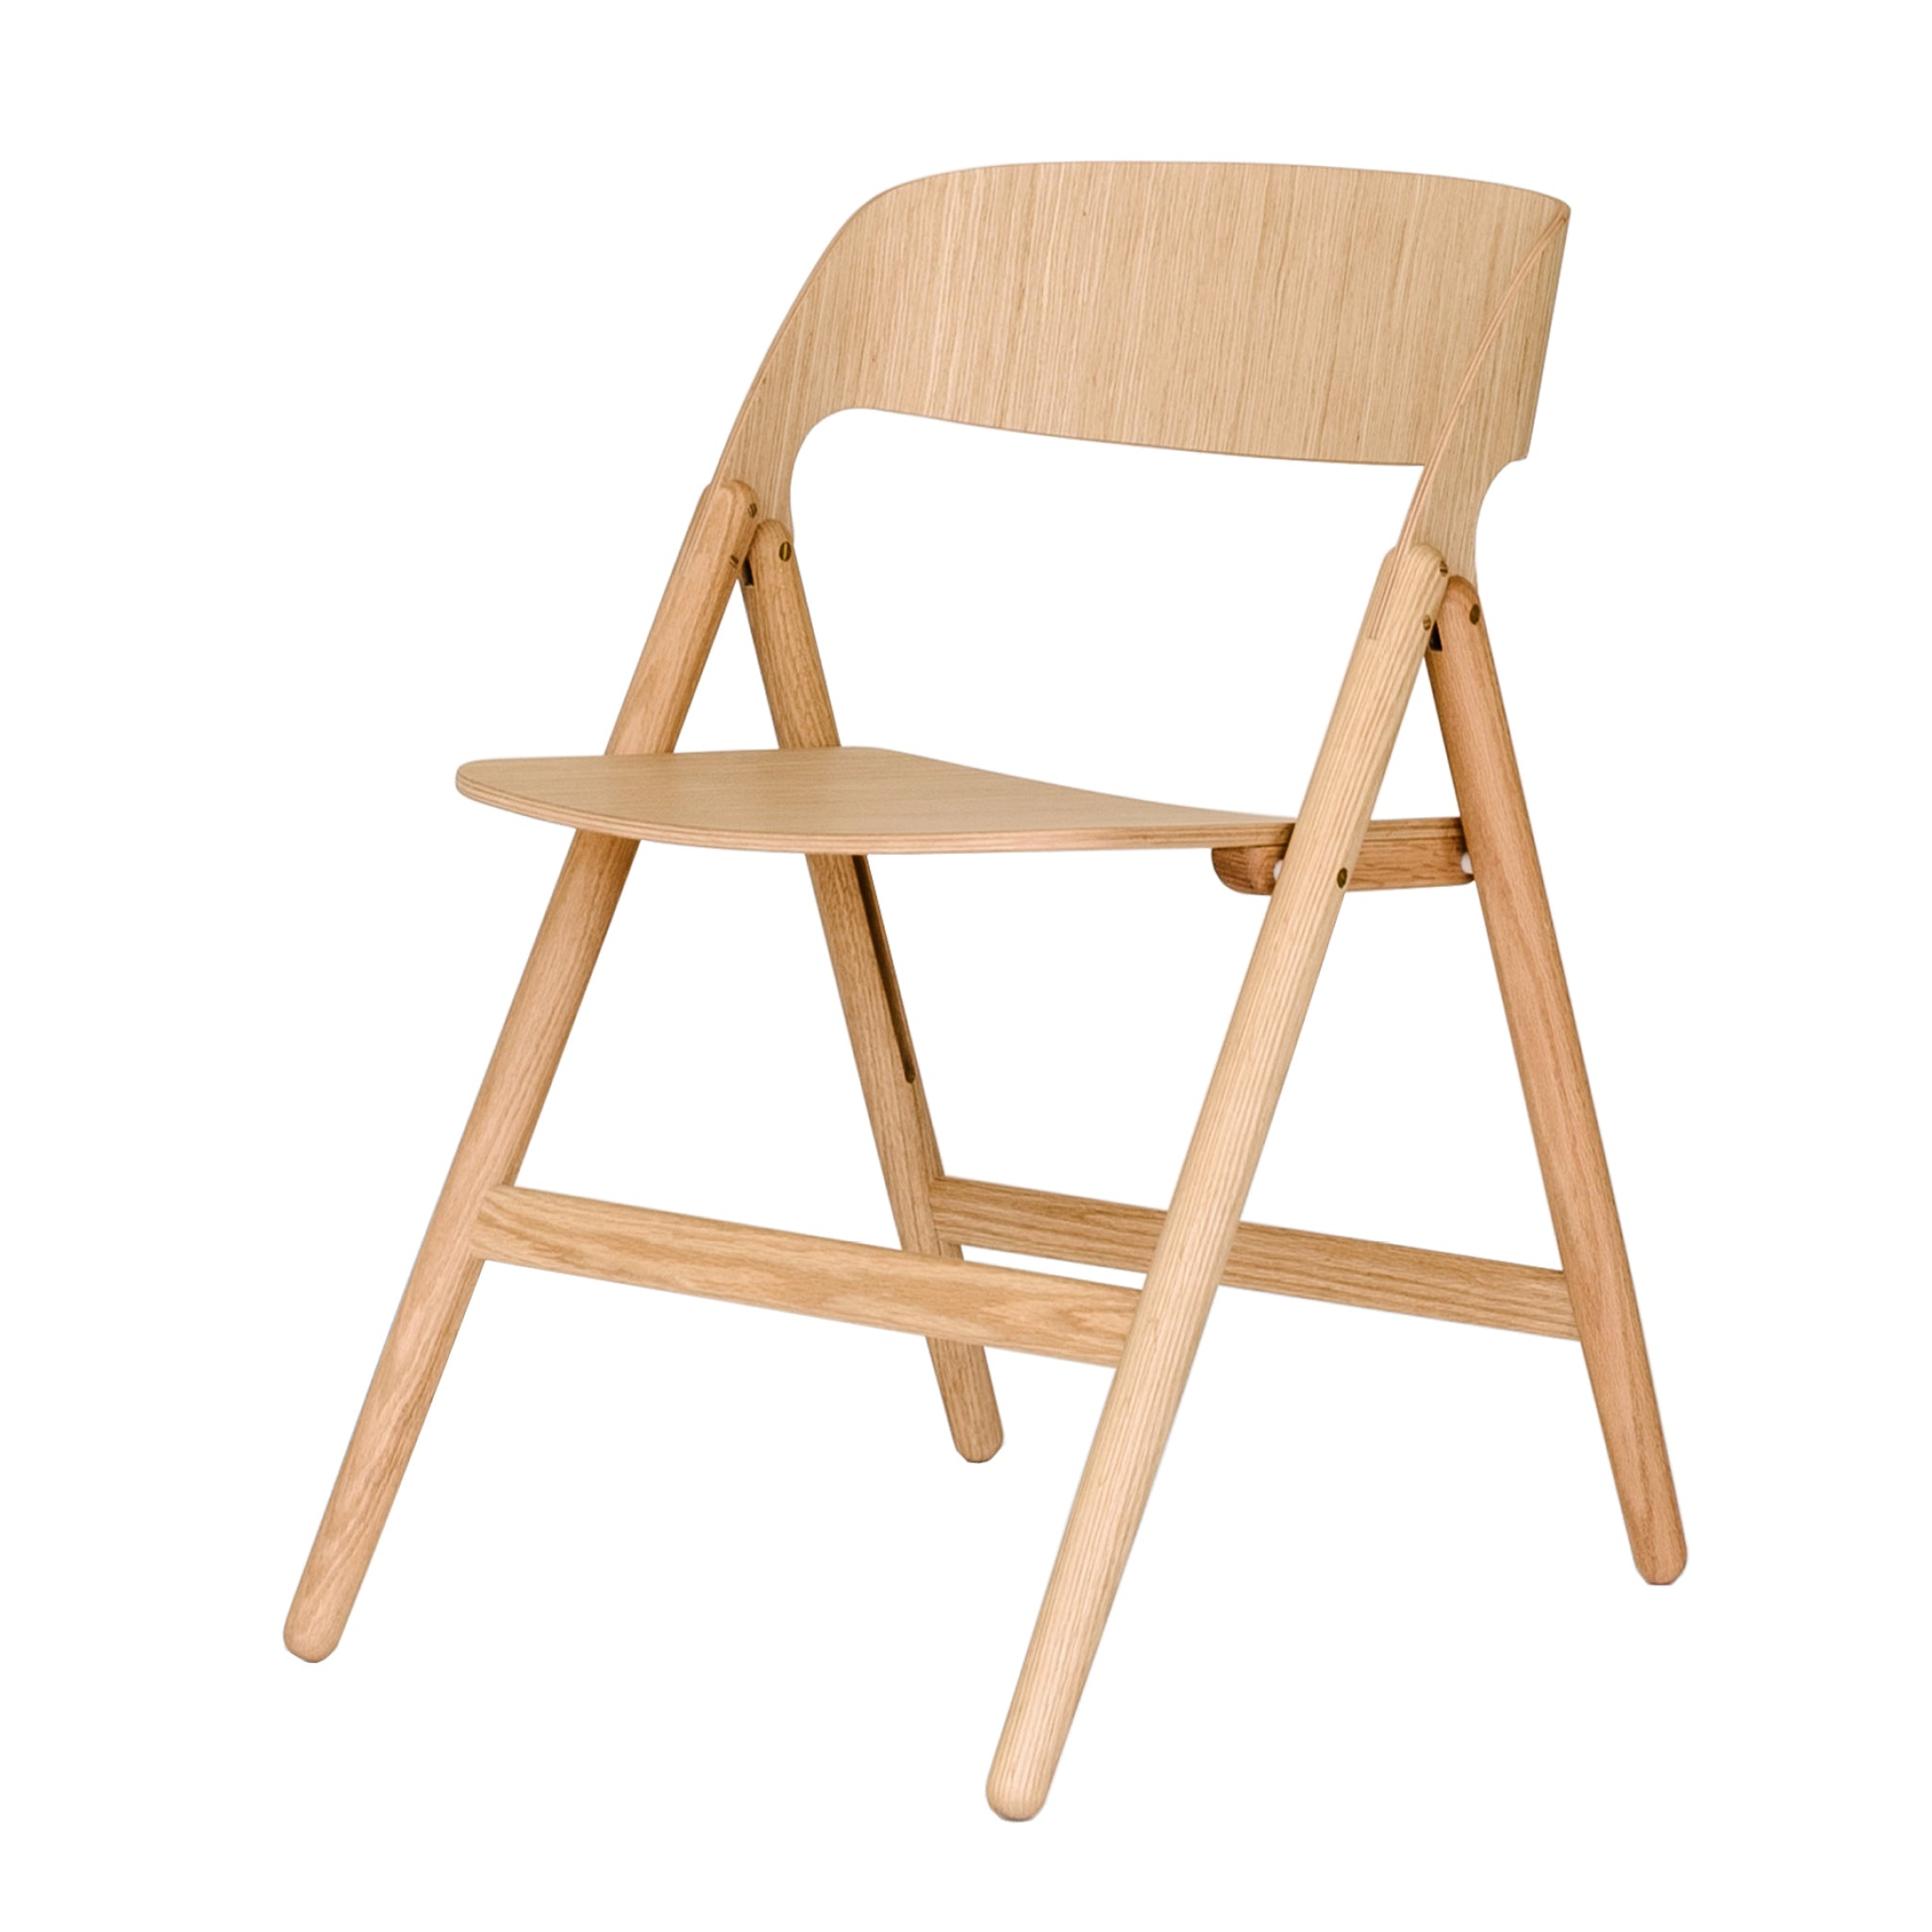 Narin Folding Chair by Case